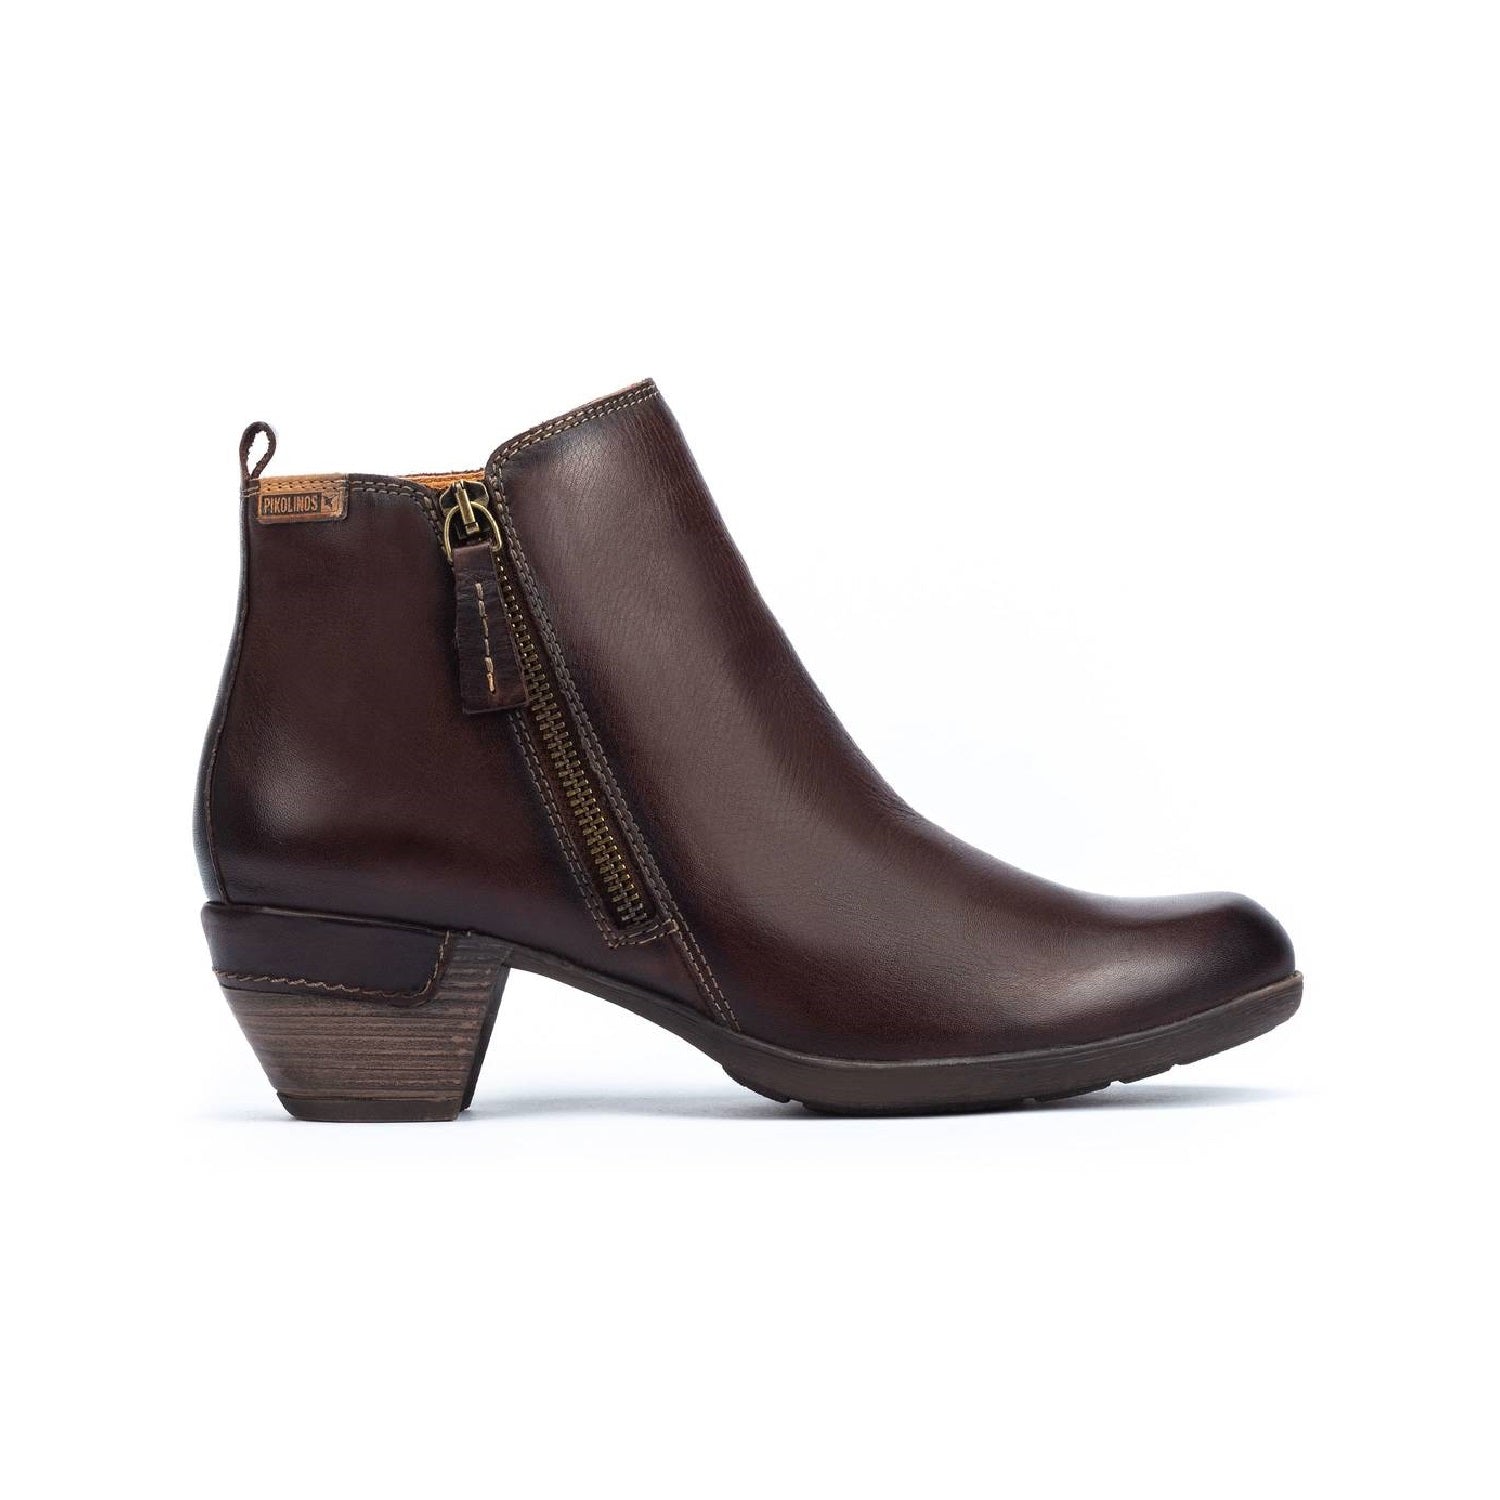 Olmo brown leather ankle boot with zipper on the side.